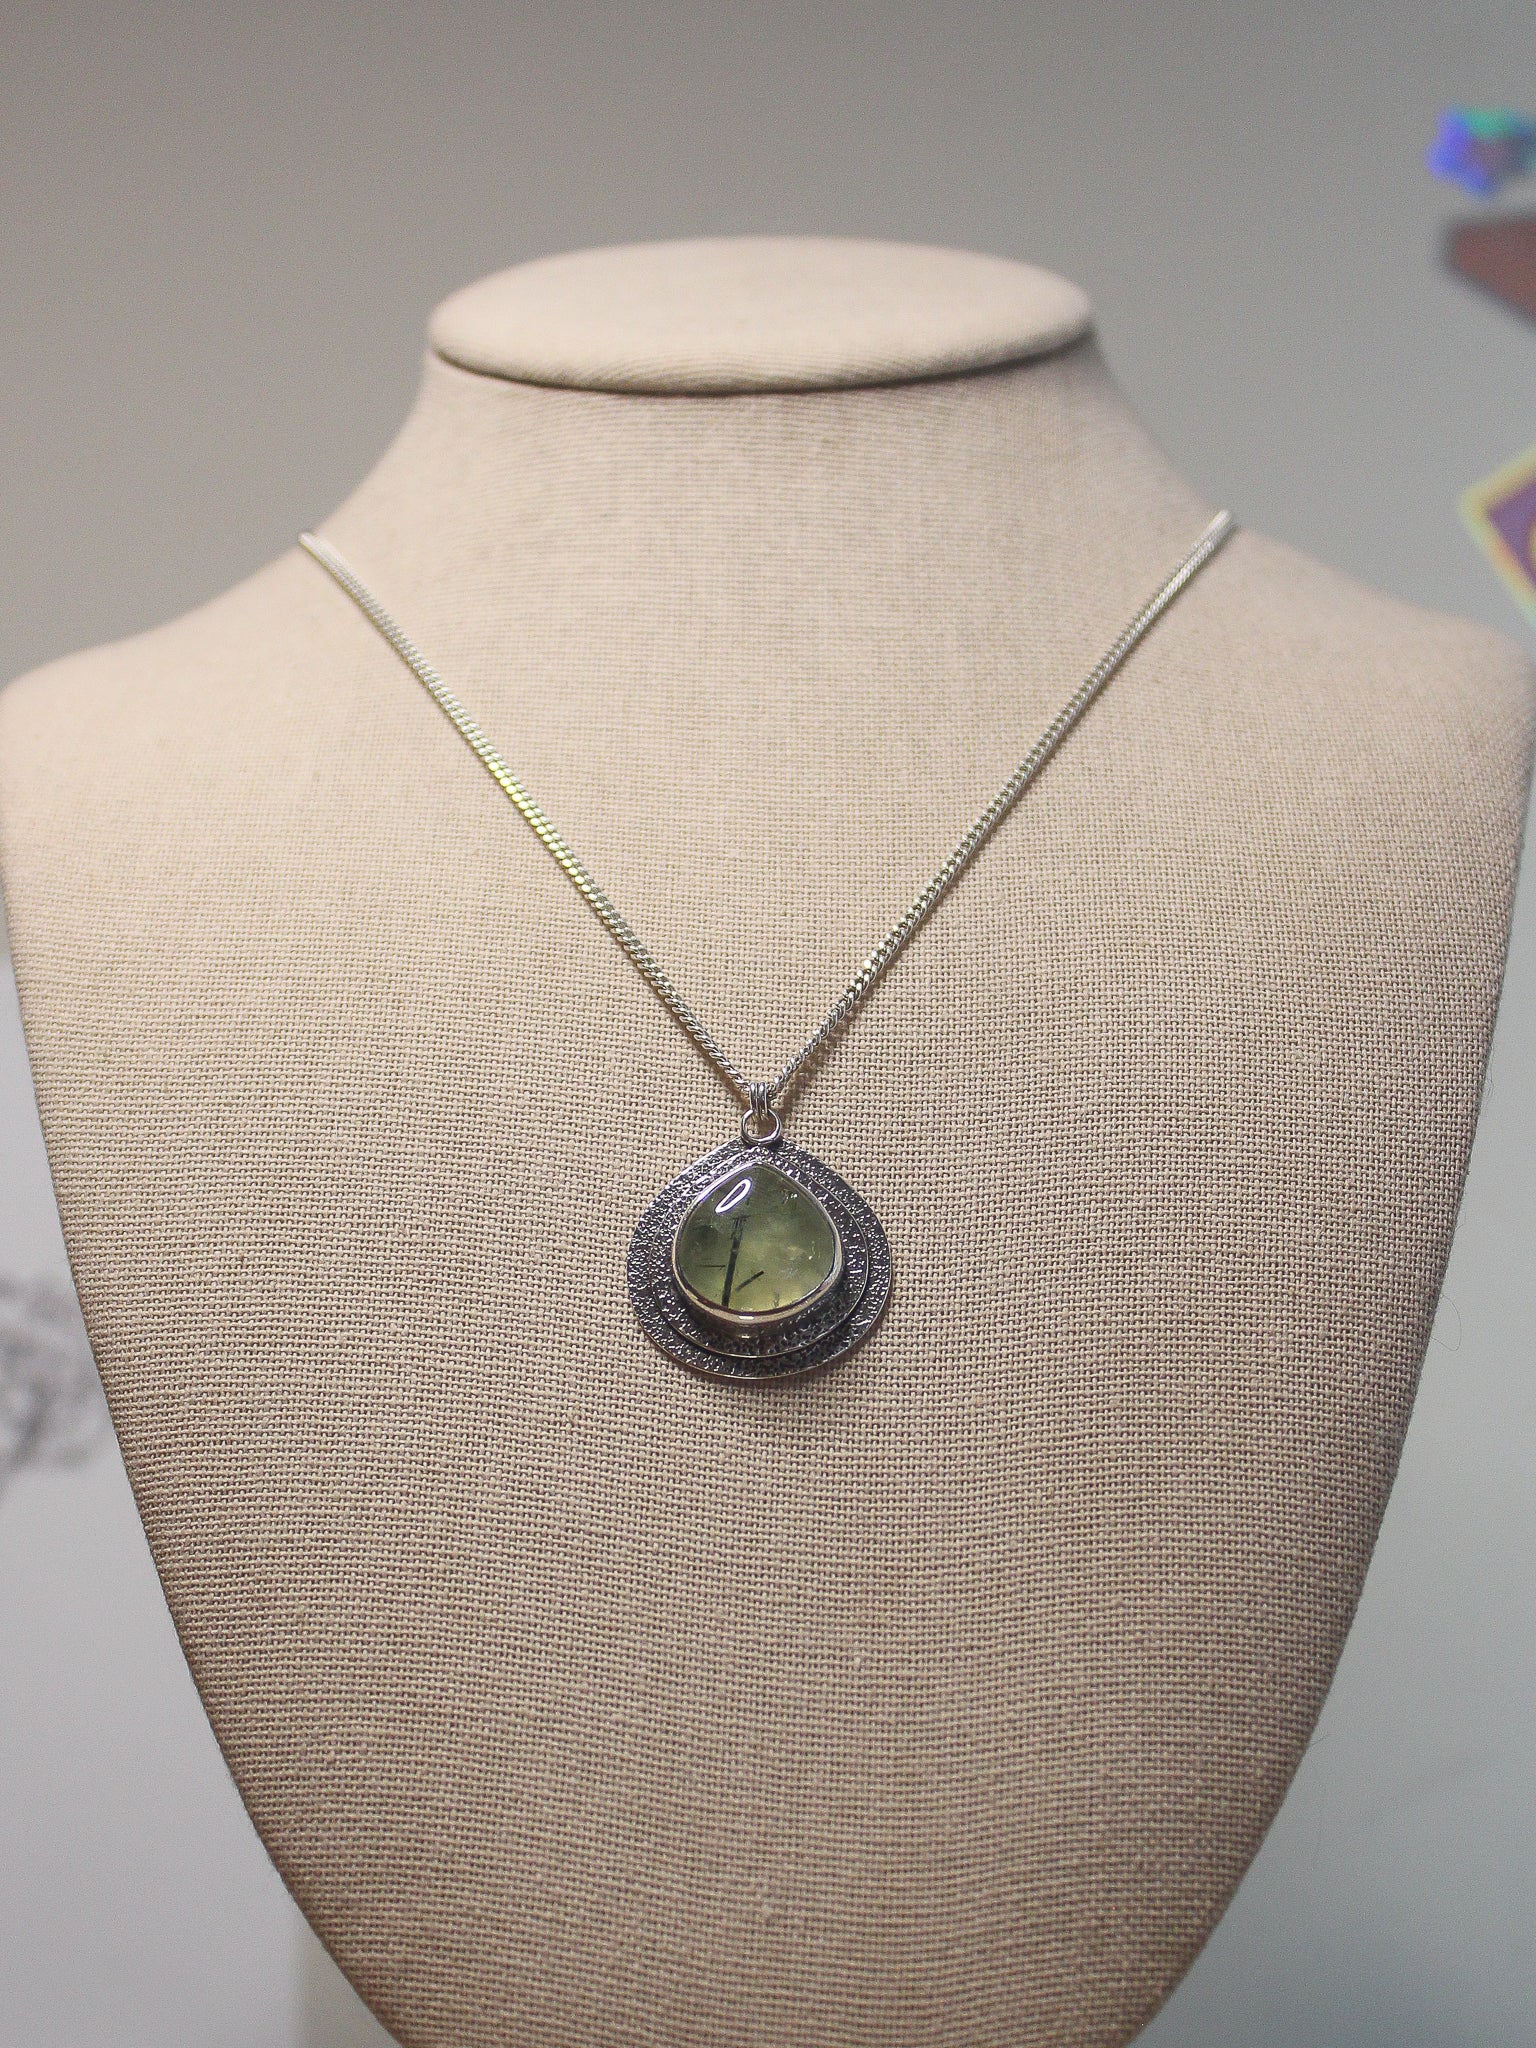 Handmade 925 sterling silver pendant with prehnite stone with black tourmaline inclusions unique handcrafted setting lily and William jewelry 